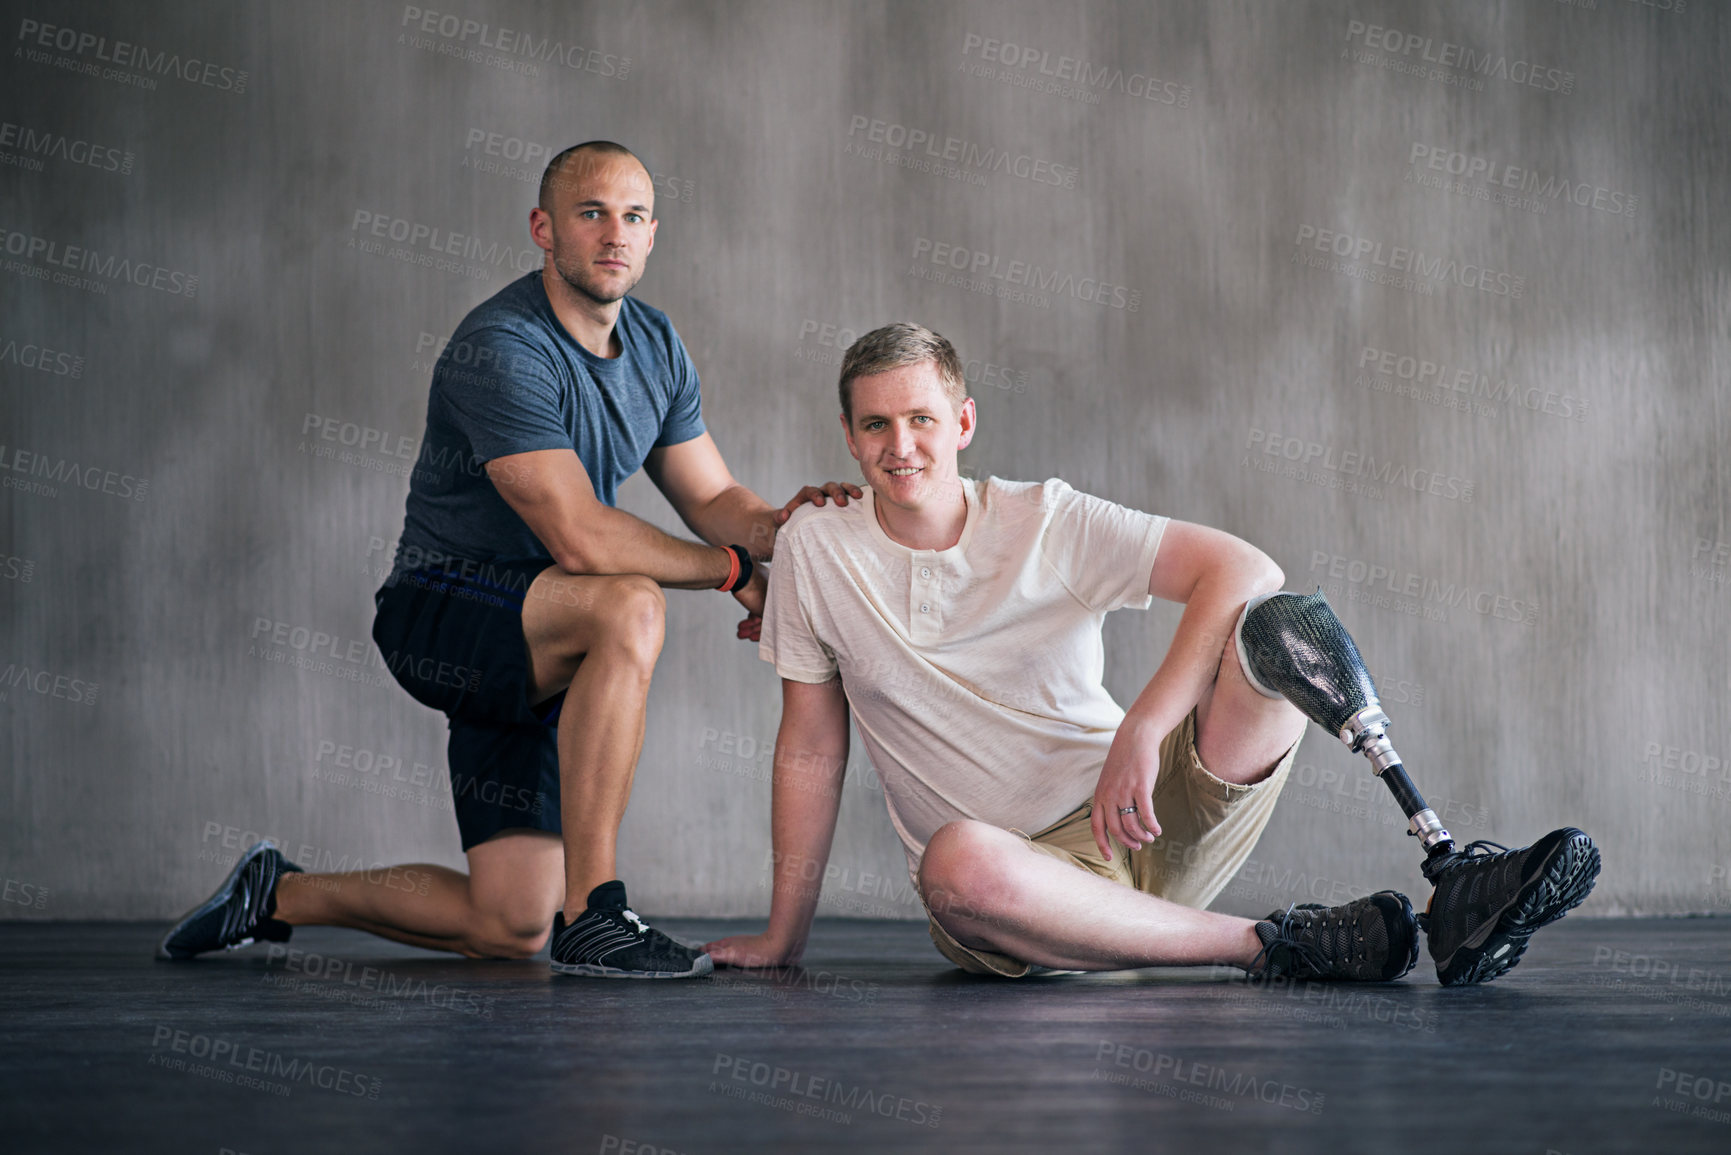 Buy stock photo Trainer, person with a disability and prosthetic leg and posing in physiotherapy, studio and gym ball. Male people, physiotherapist and amputee for wellness, fitness and exercise in sports center
